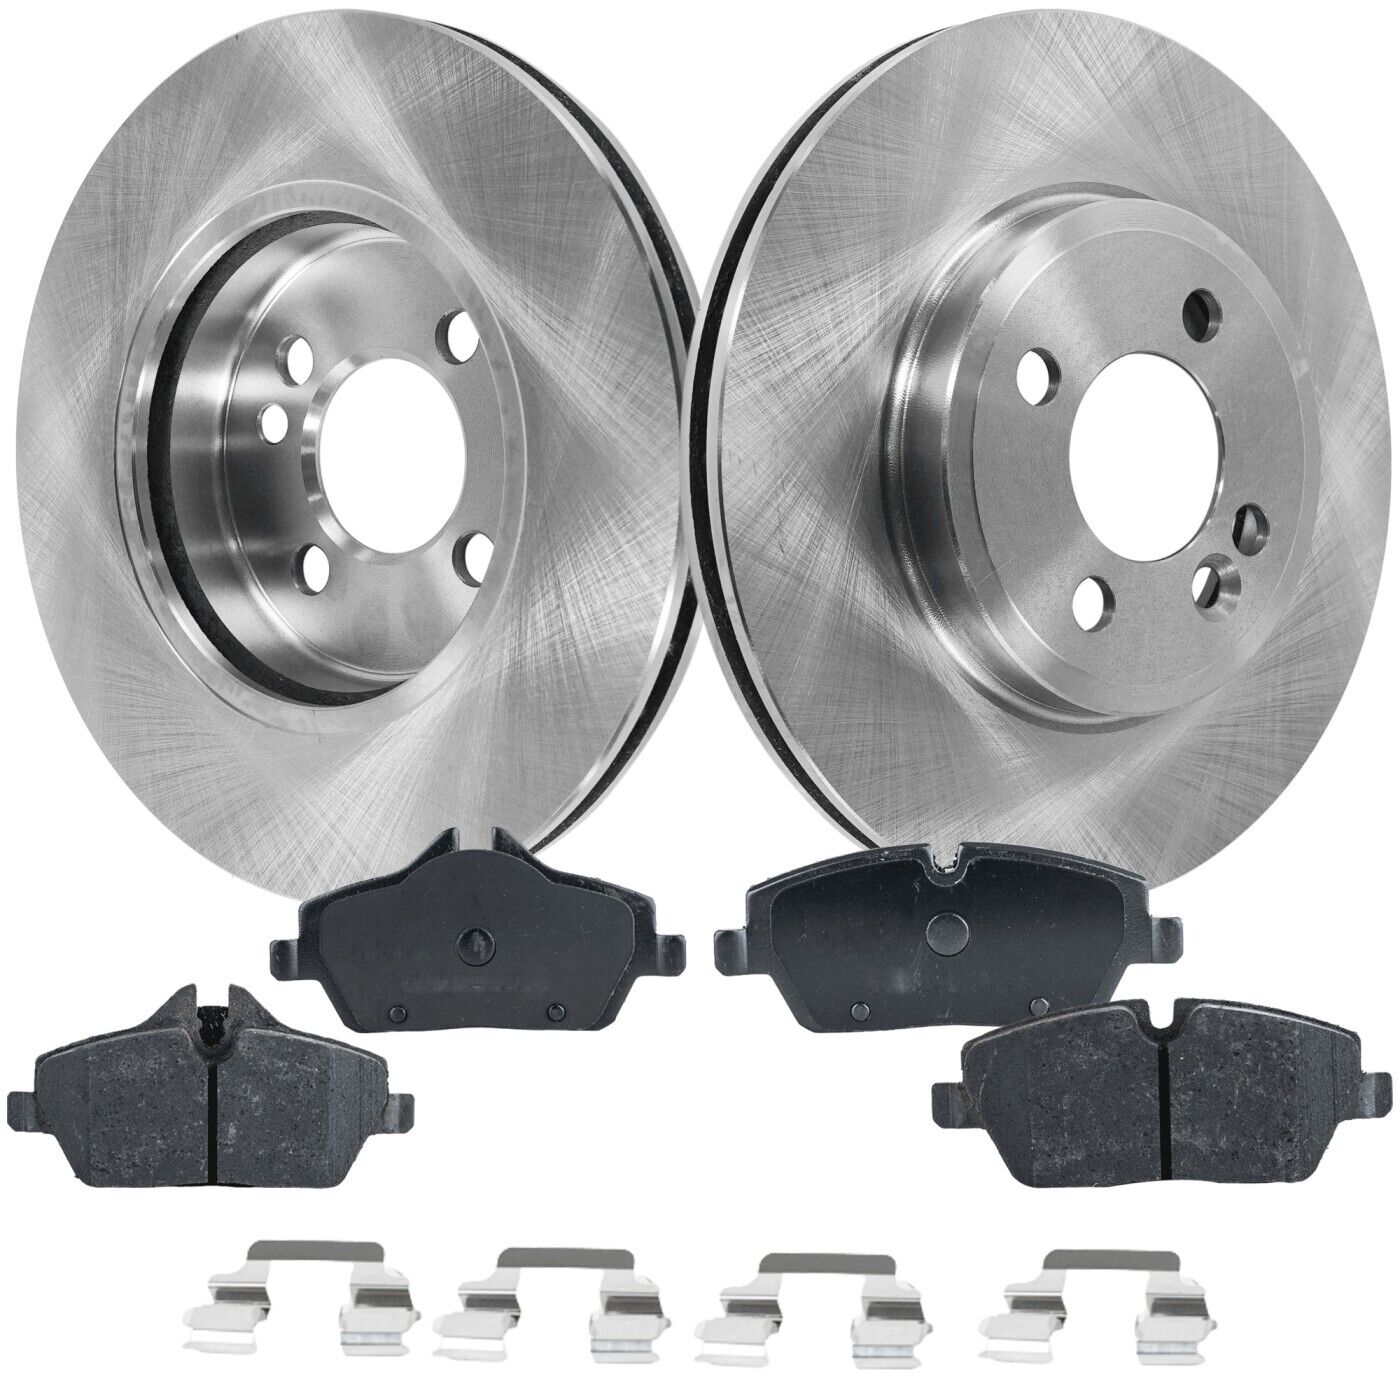 Front Brake Disc Rotors and Pads Kit For Mini Cooper 2007 2008 2009 2010-2015